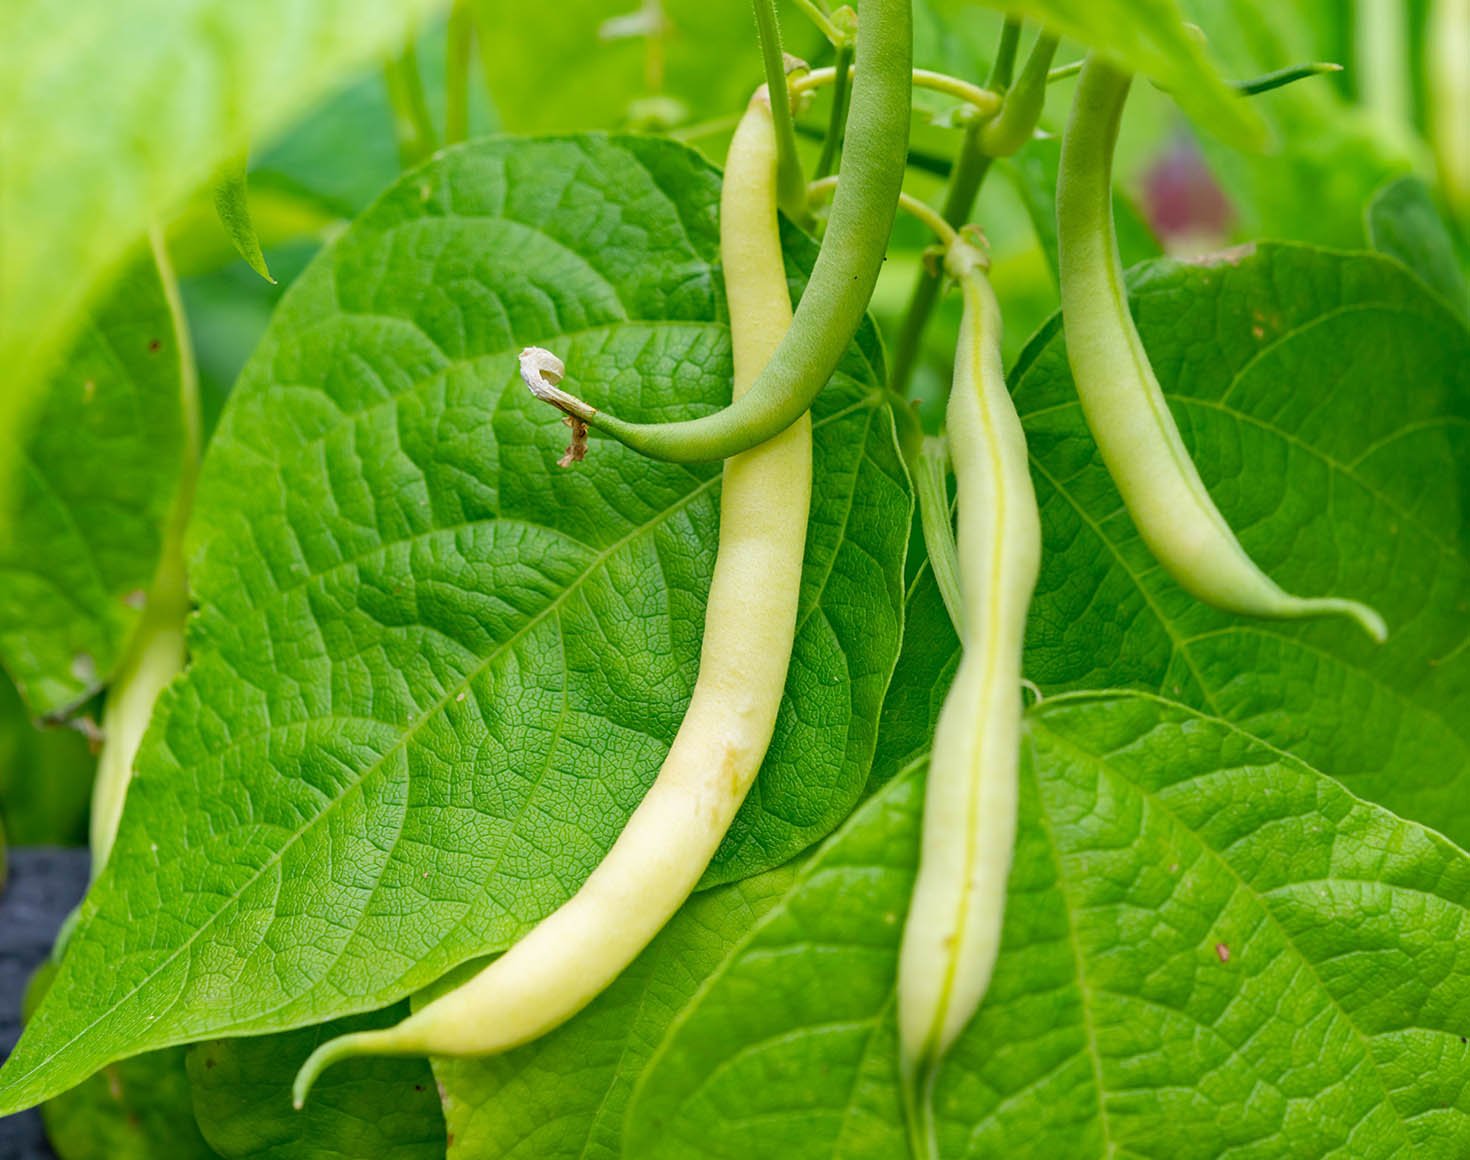 ripe-organic-cannellini-beans-hanging-on-plant-in-garden